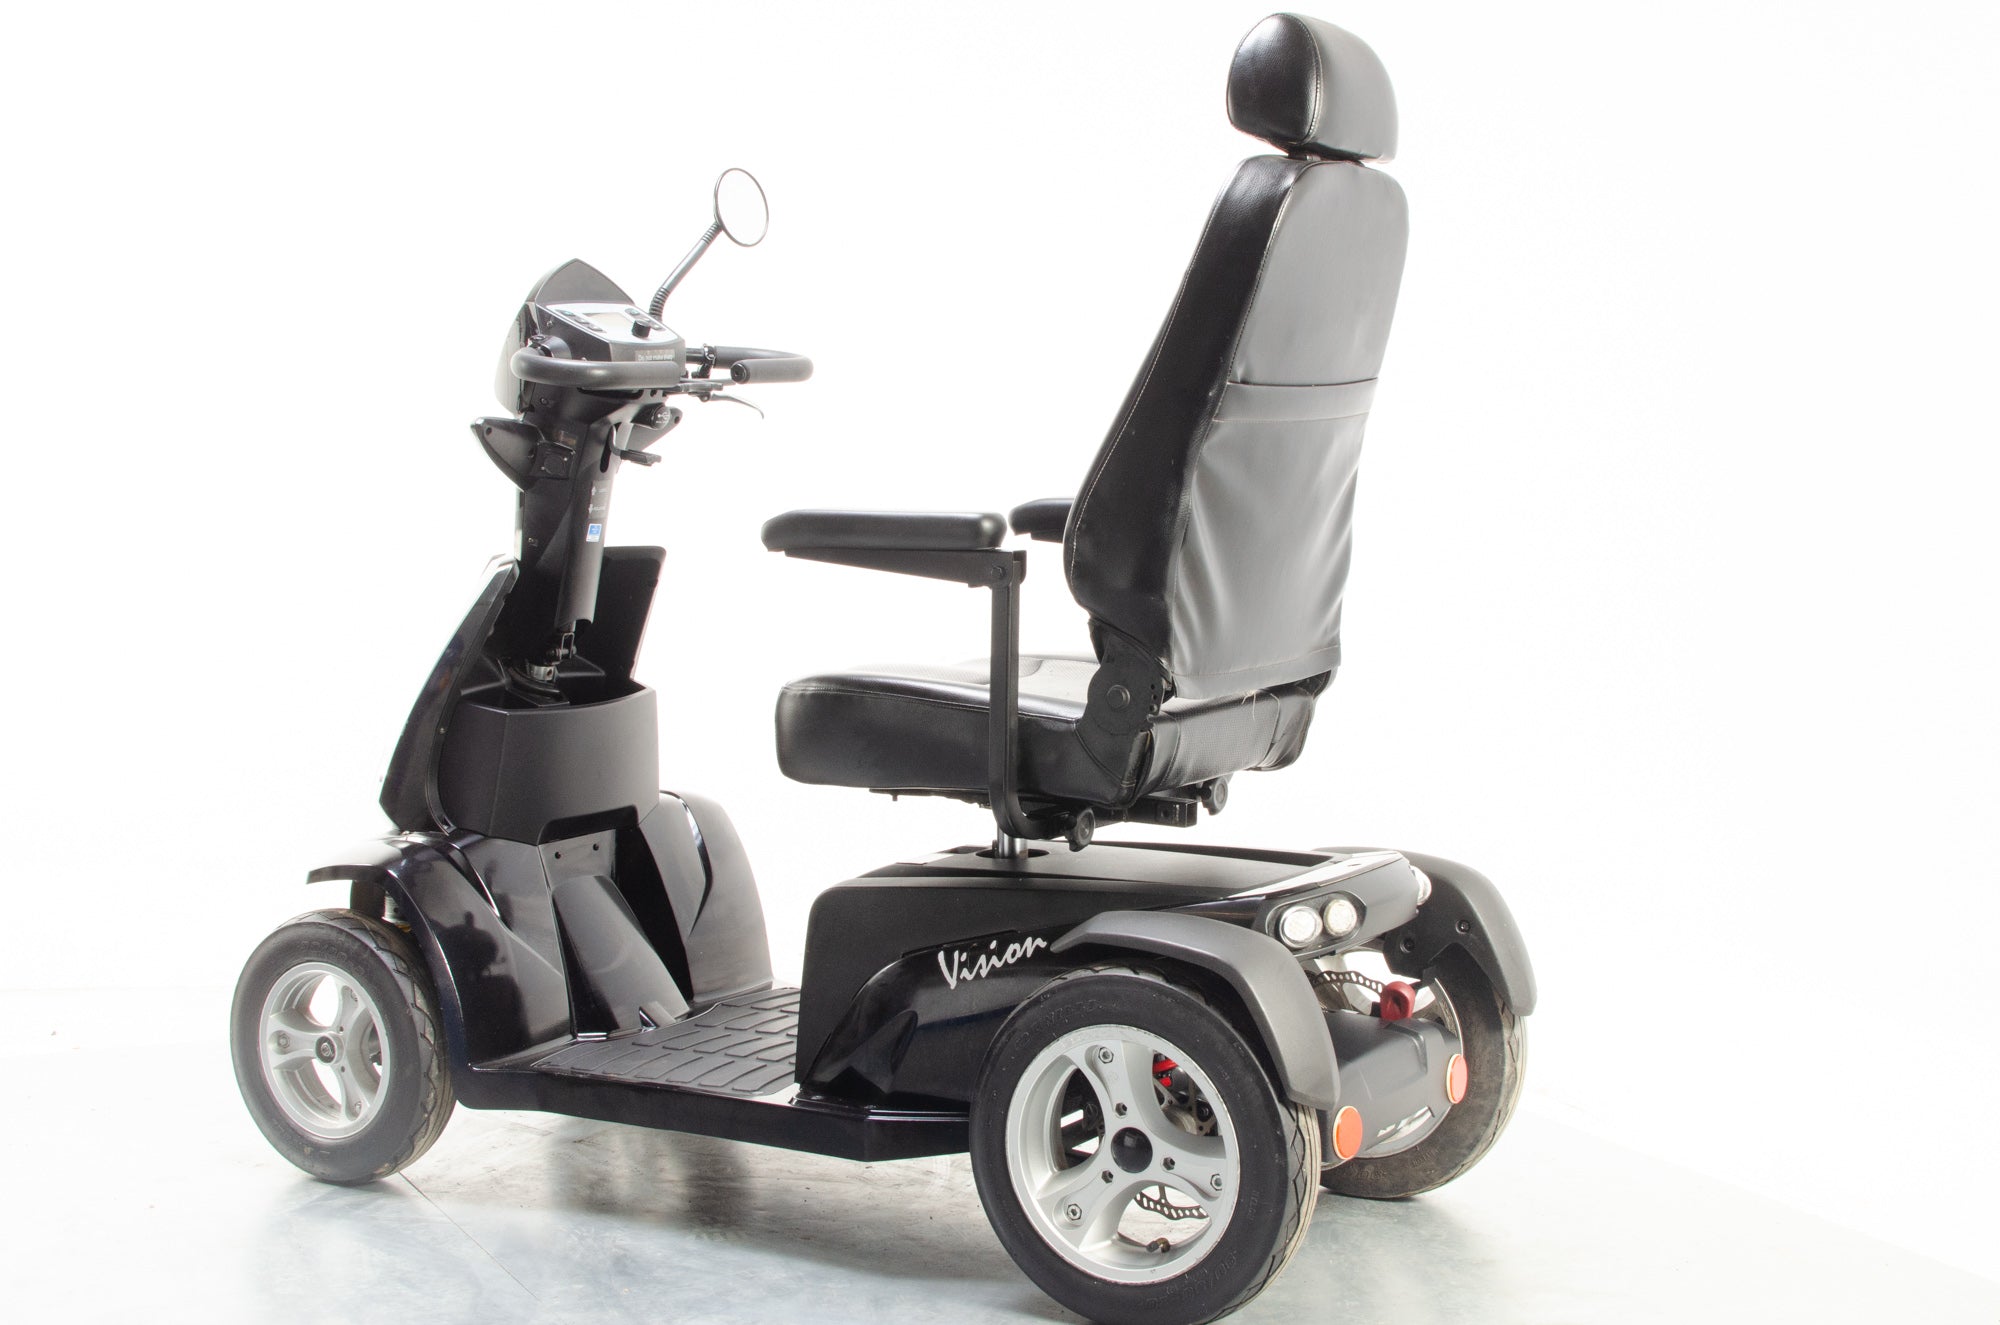 Rascal Vision Used Electric Mobility Scooter 8mph Large All-Terrain Road Legal